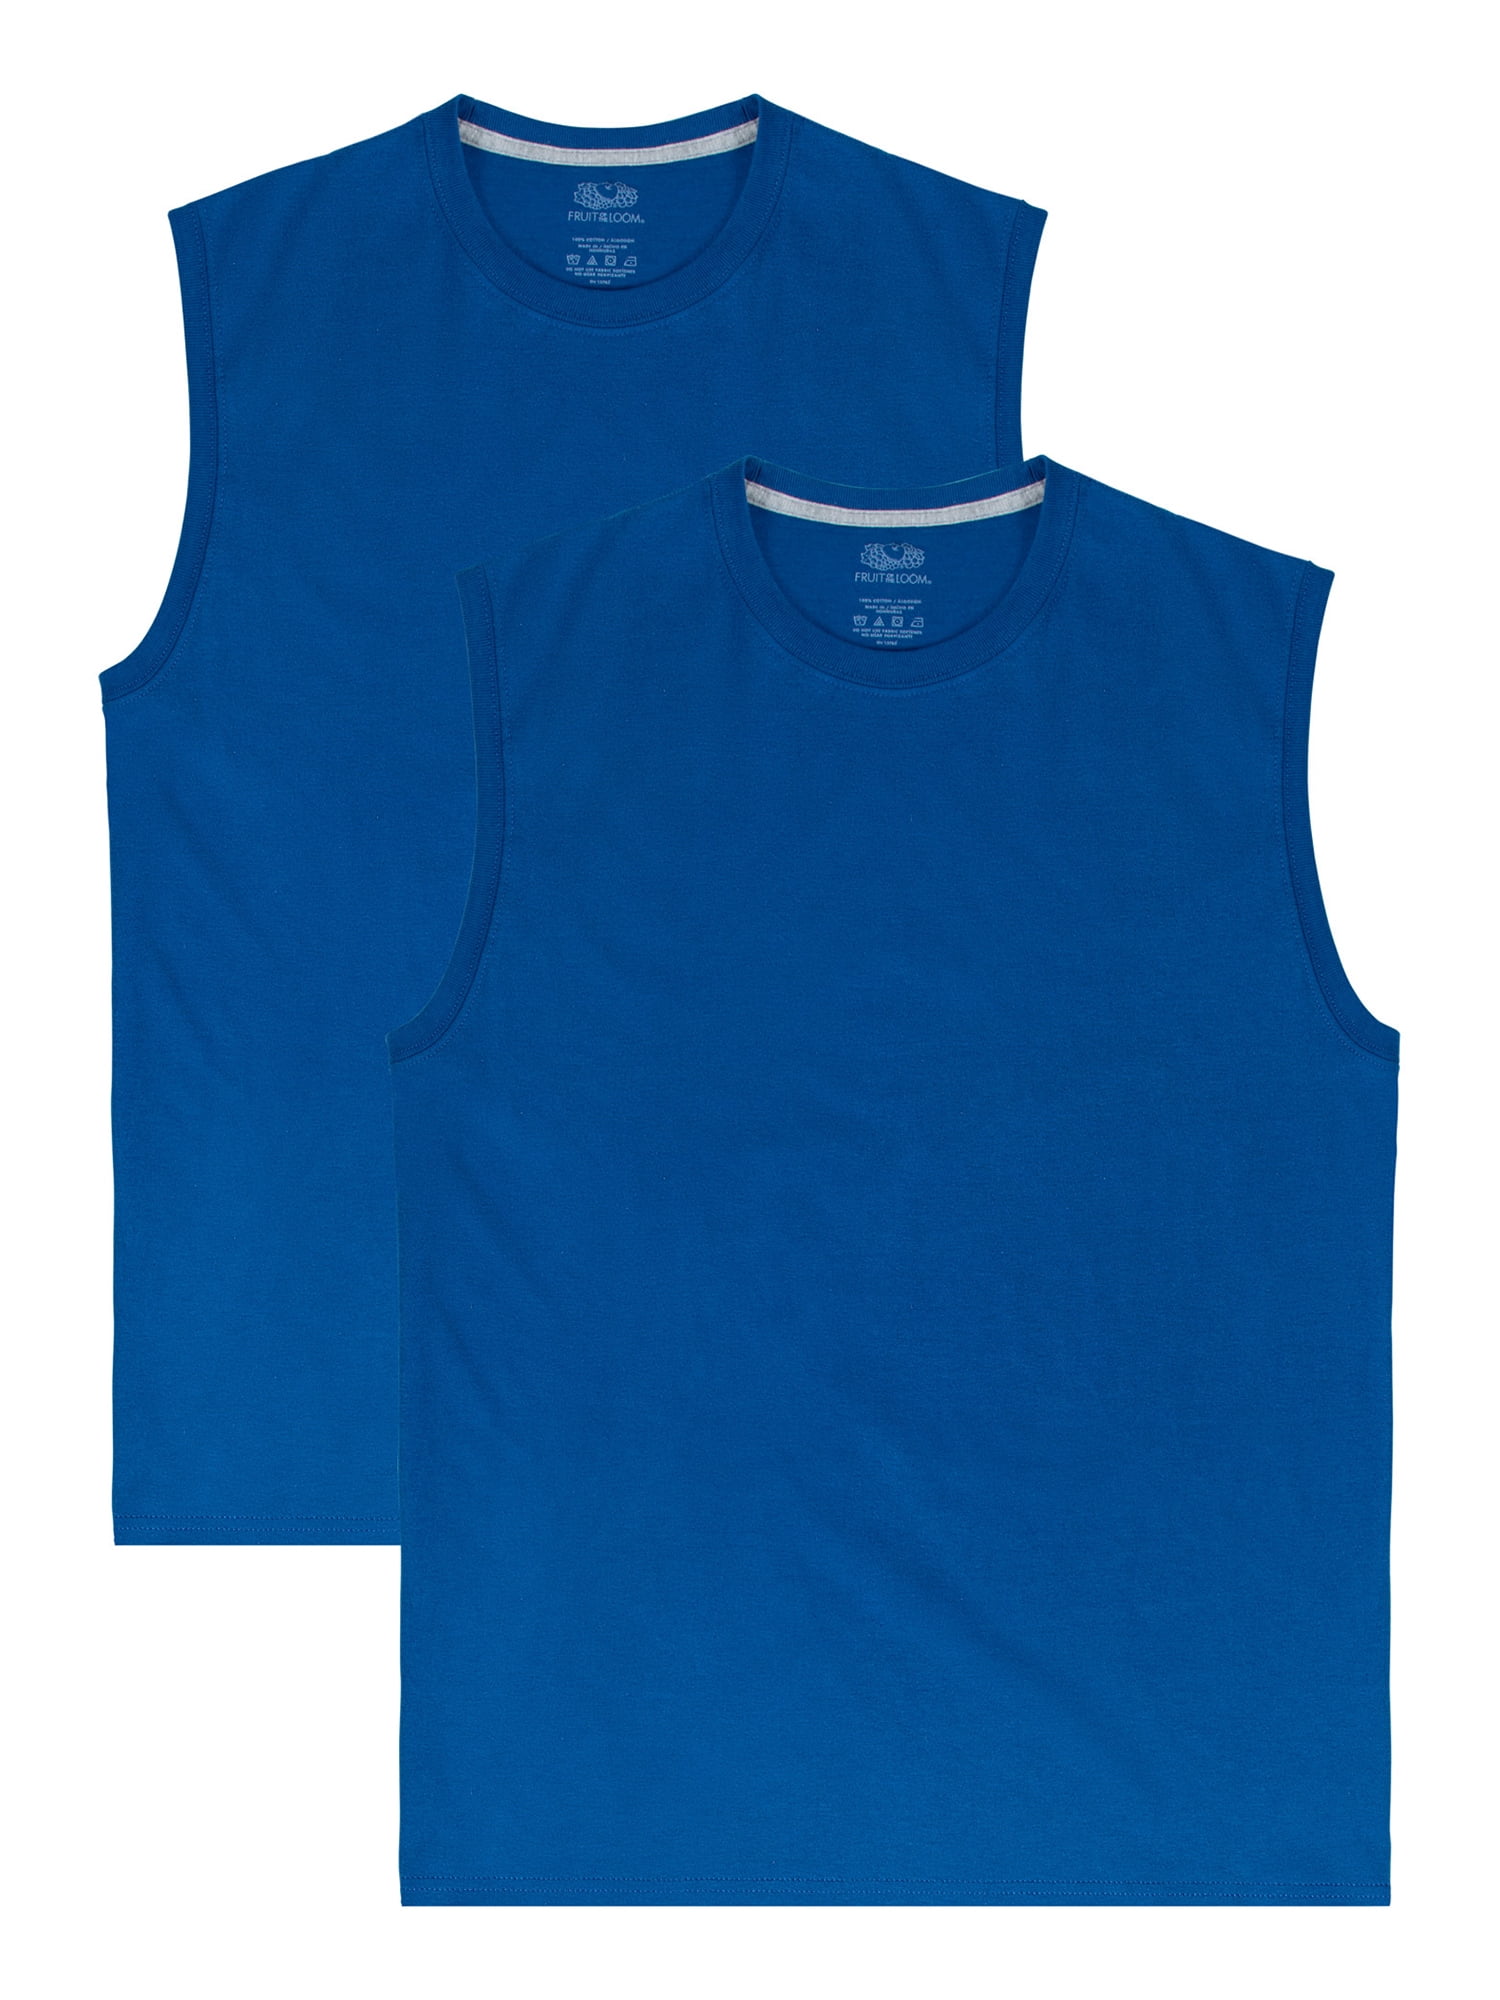 Fruit of the Loom Men's EverSoft Muscle Shirts, 2 Pack - Walmart.com